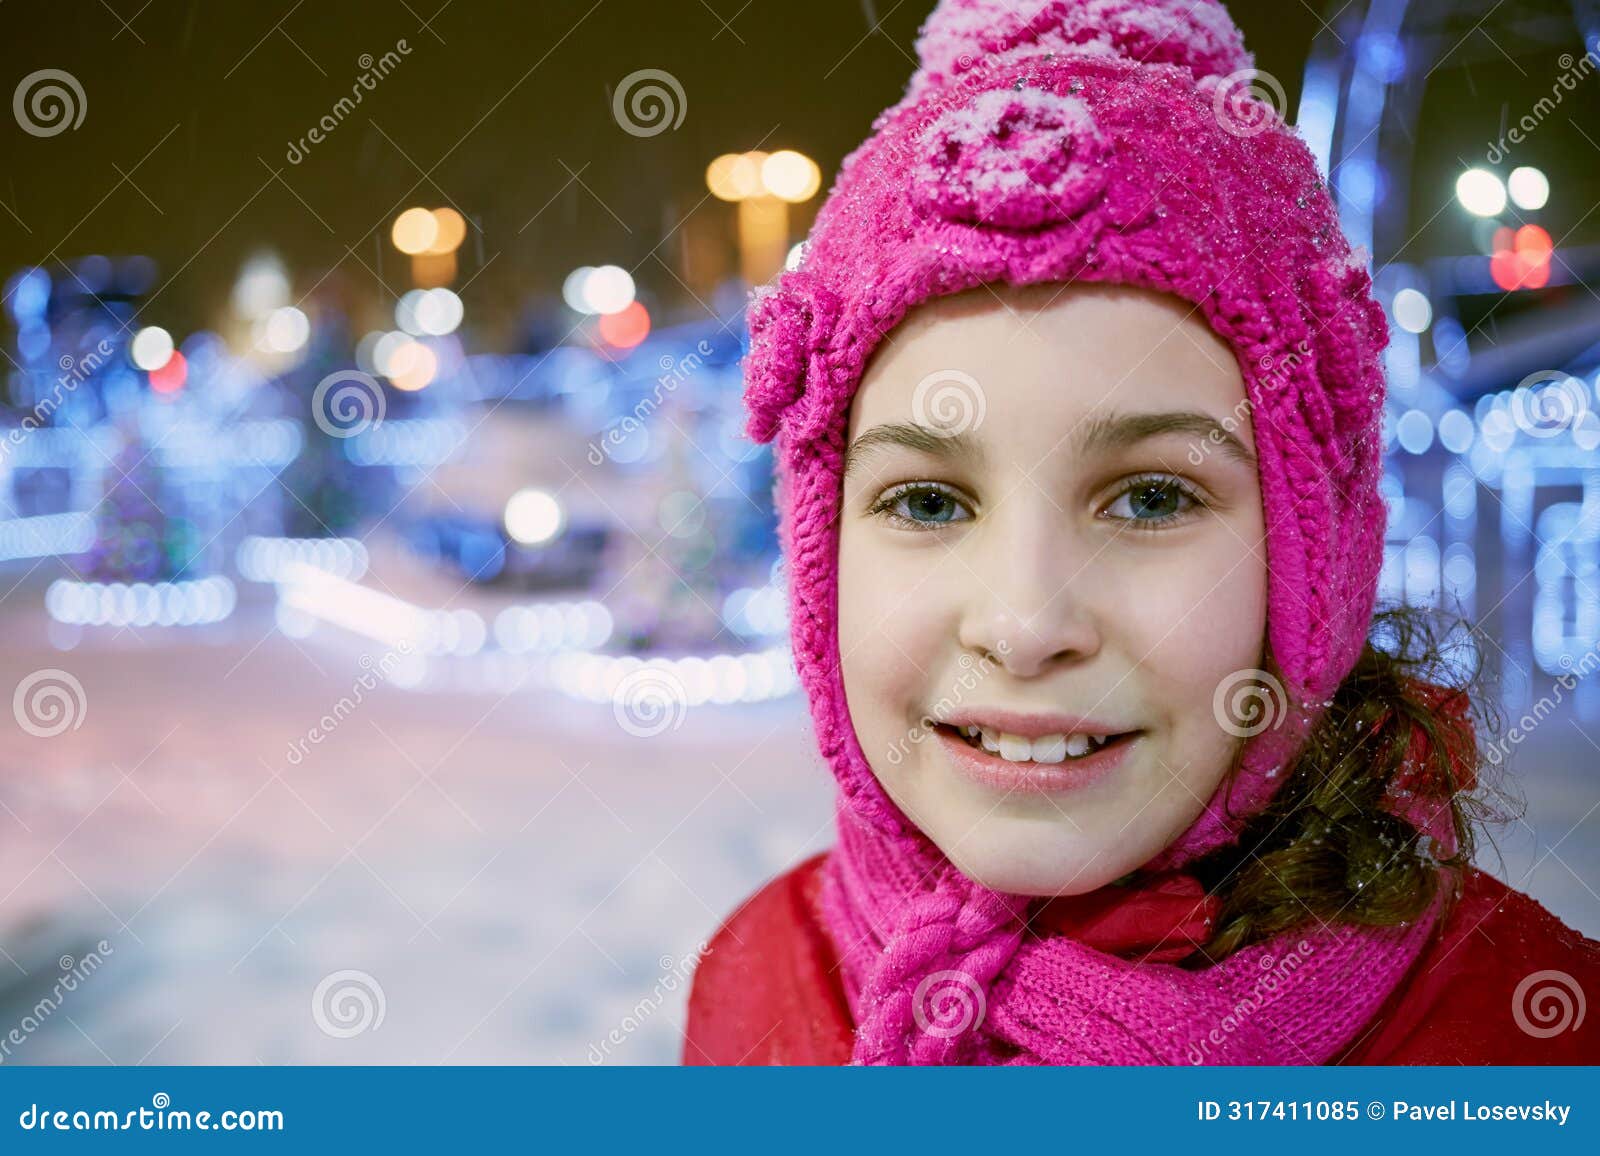 closeup face of little girl in winter knitted hat